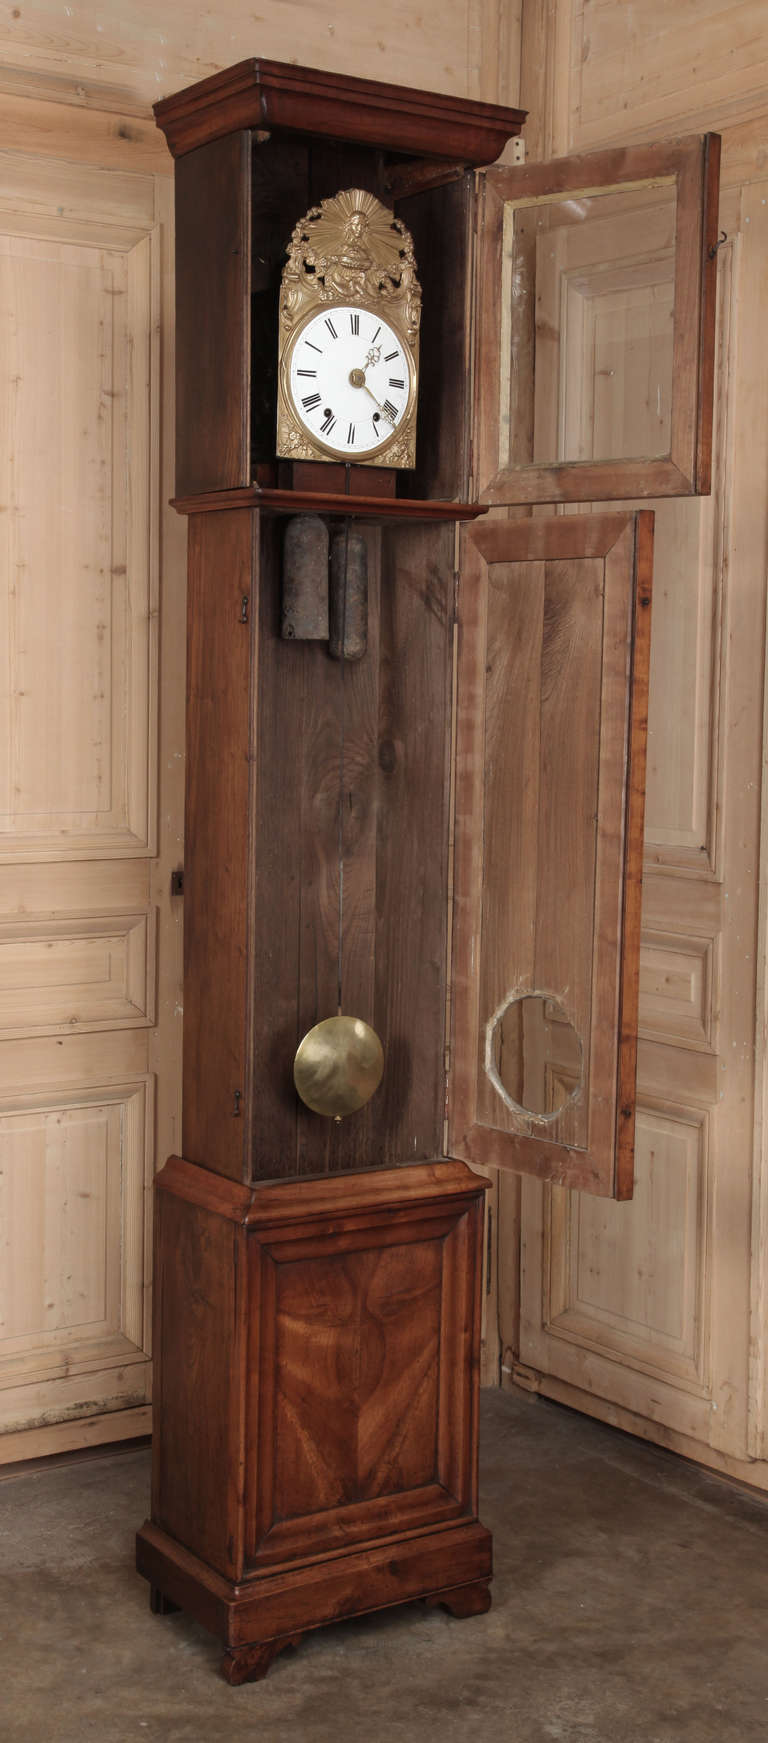 Antique Grandfather Clocks have remained popular for centuries, at once creating a focal point for a room, keeping track of time itself, and providing a lovely furniture accent!  This Antique French Louis Philippe Period Clock has been crafted from